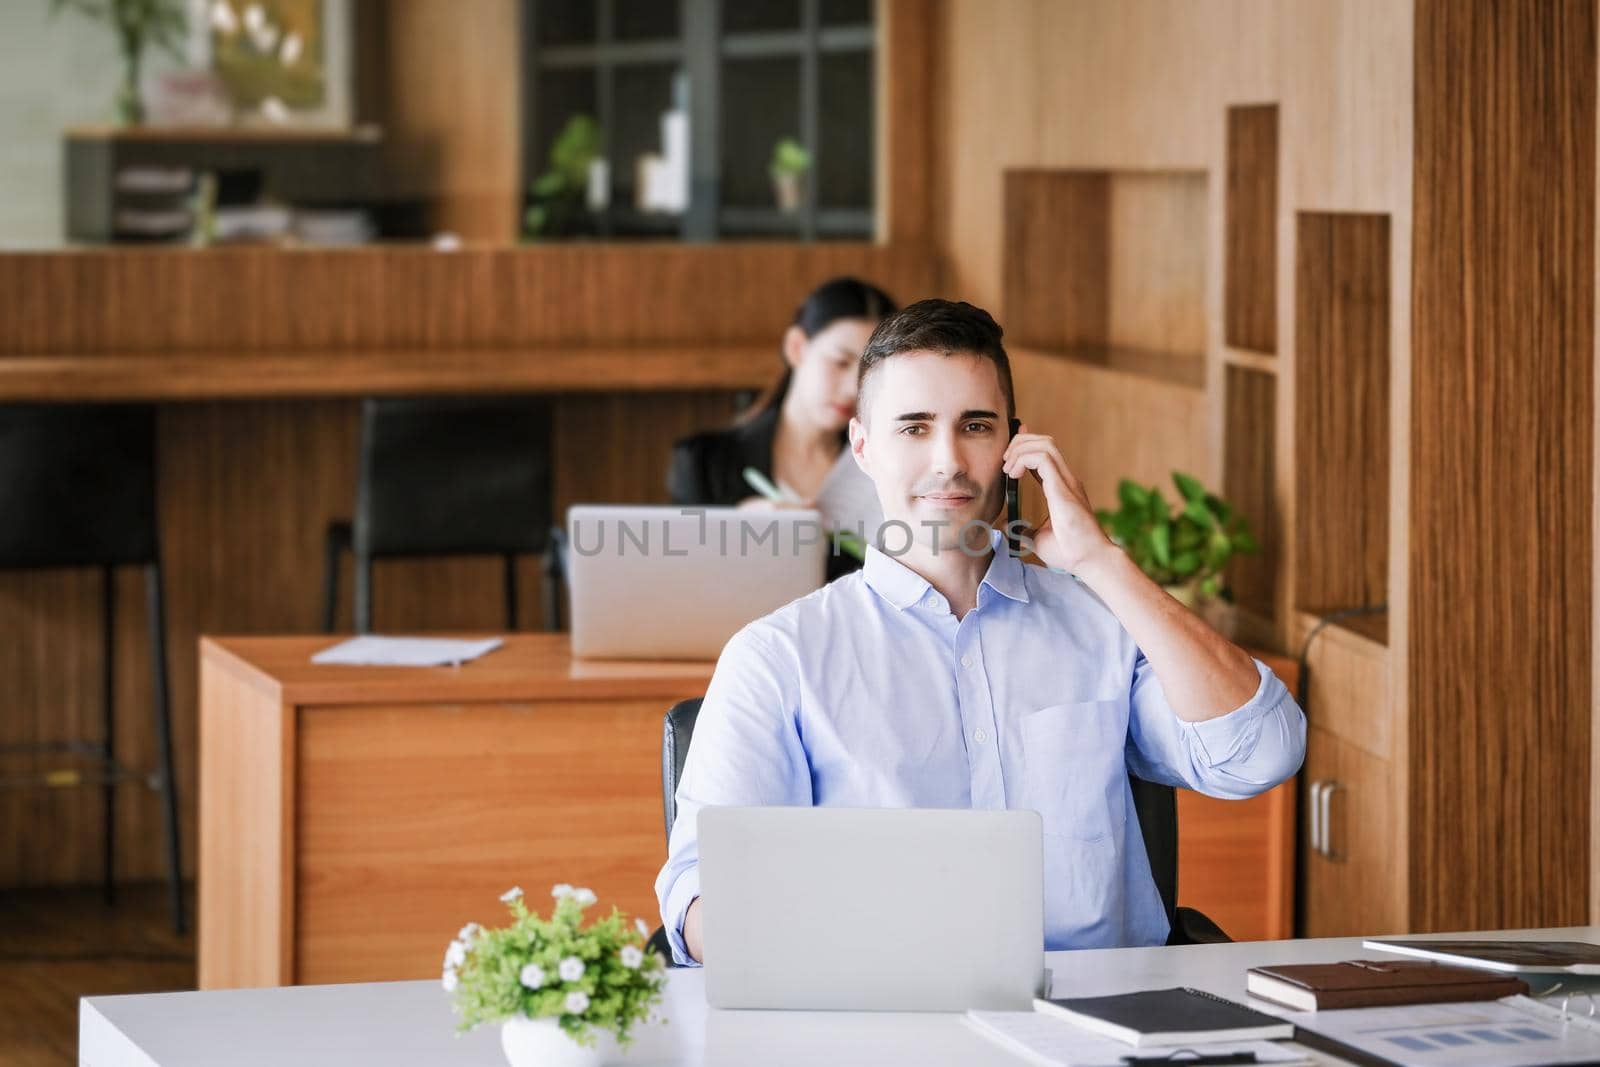 Male marketing manager using phone to talk to venture capital firm to increase profit potential